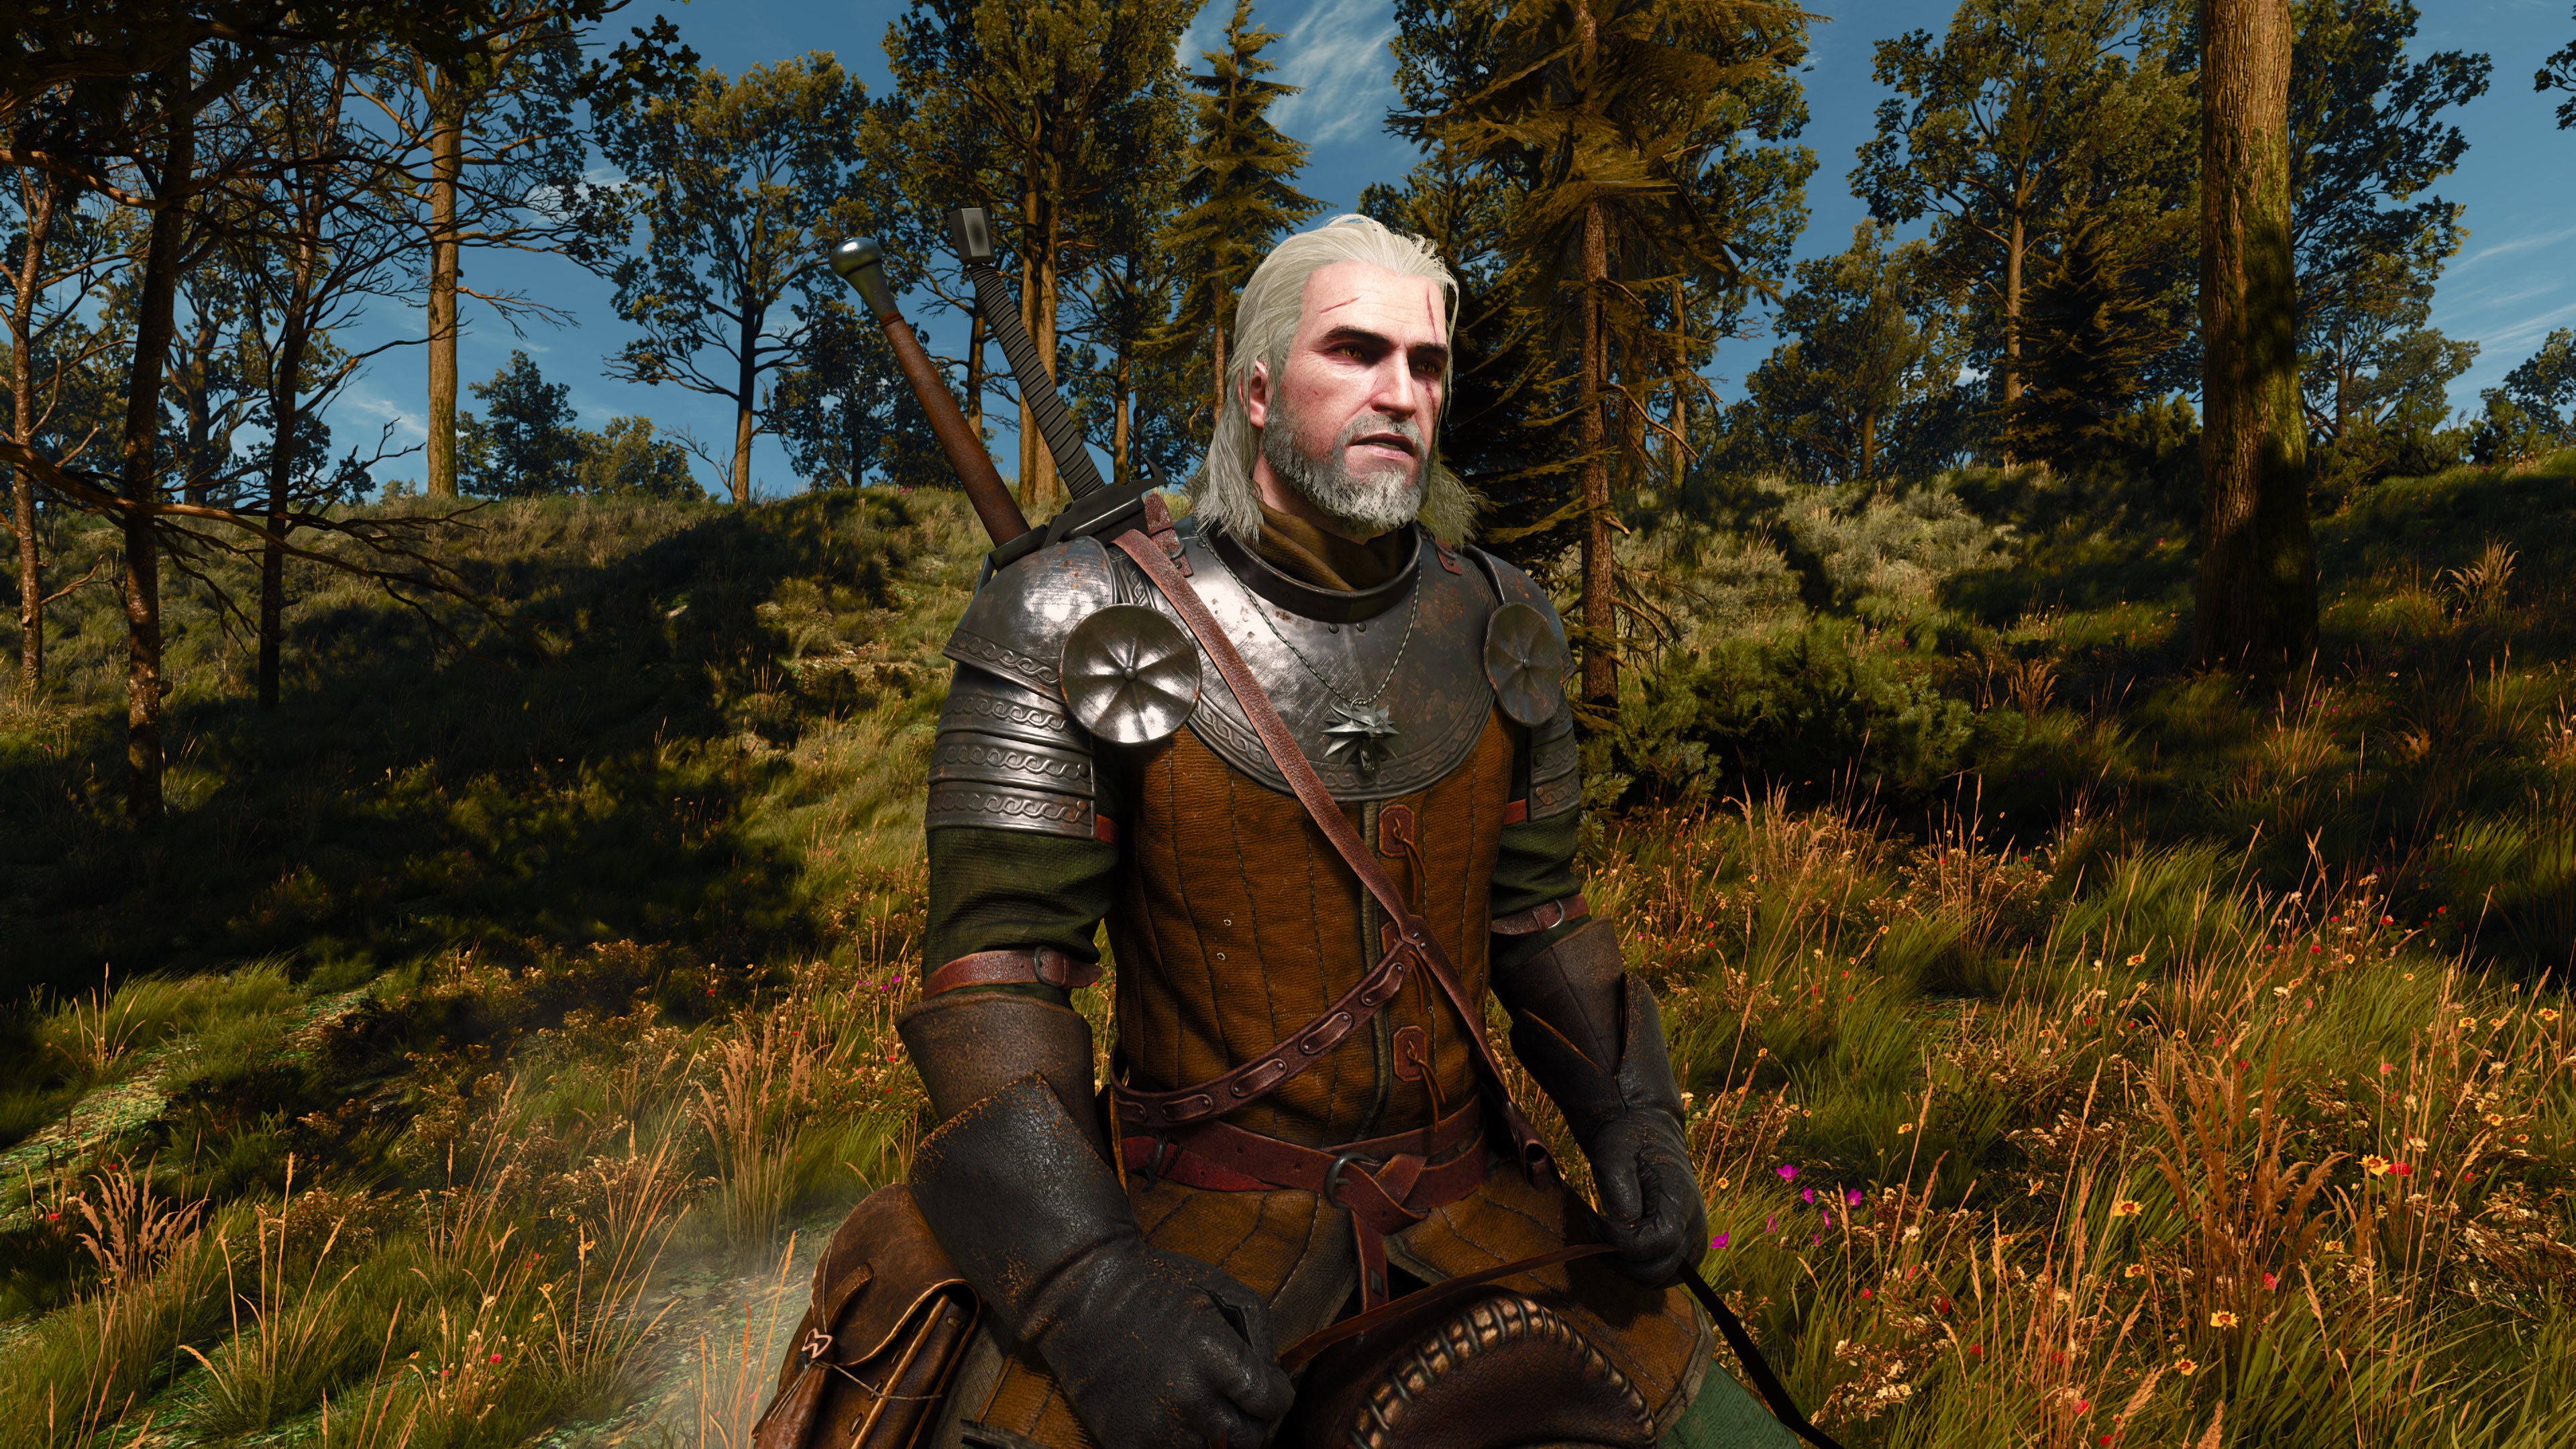 General 3840x2160 The Witcher nature Nvidia ray tracing The Witcher 3: Wild Hunt CD Projekt RED Geralt of Rivia CGI video games video game men video game characters